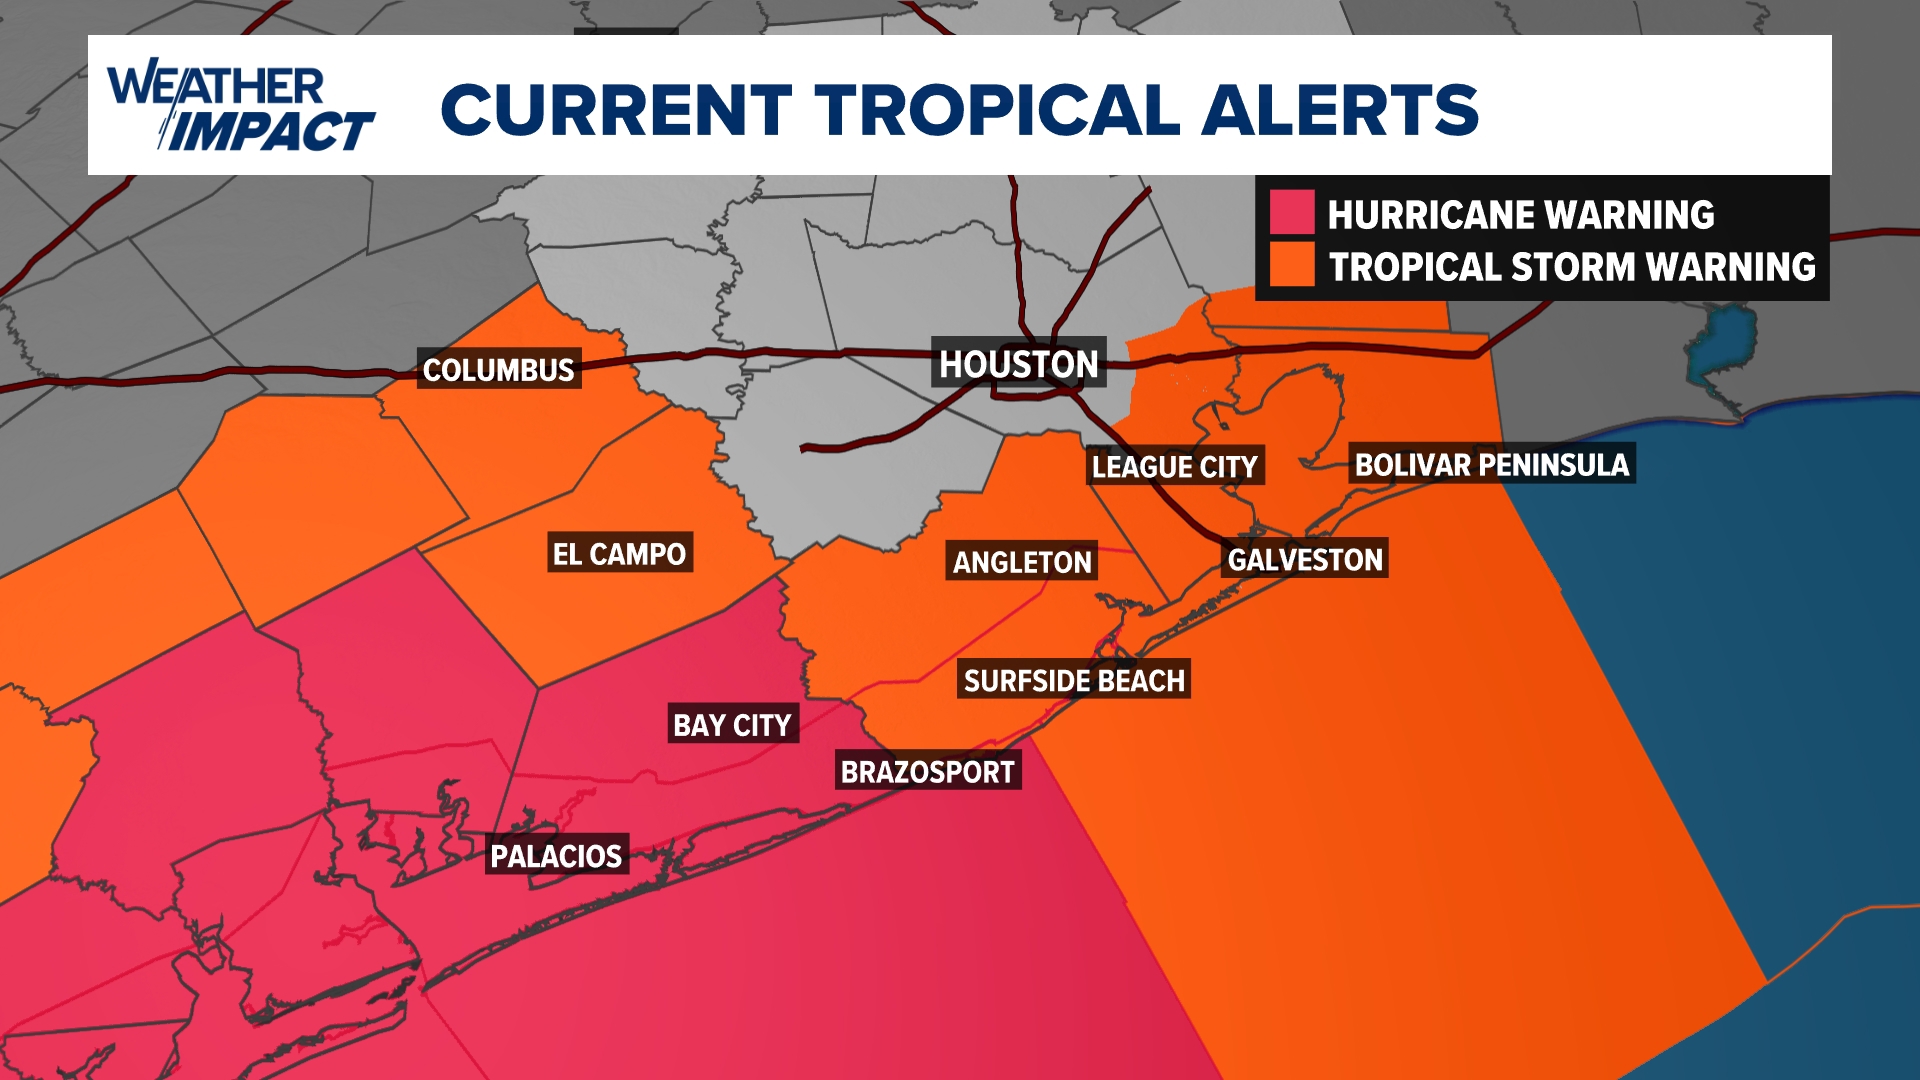 We're tracking the latest movements of Tropical Storm Beryl as it approaches the Texas coast.